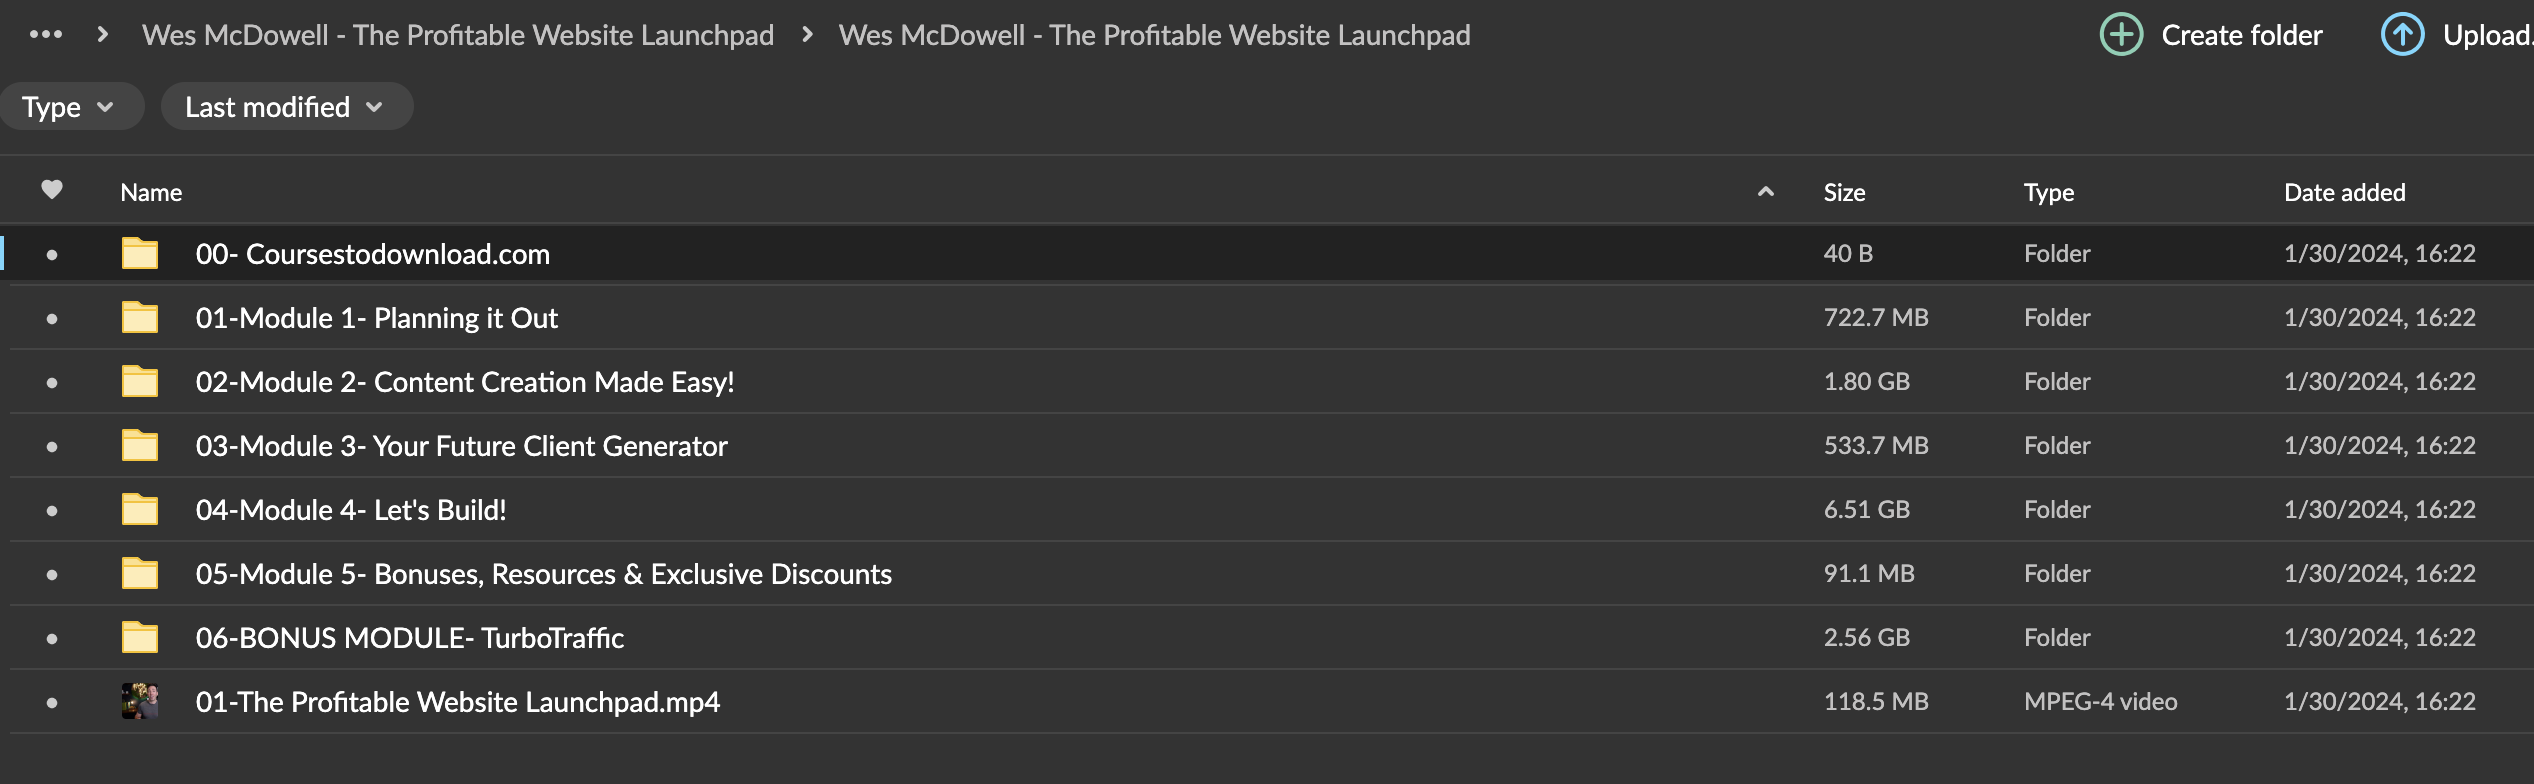 Wes McDowell - The Profitable Website Launchpad Download